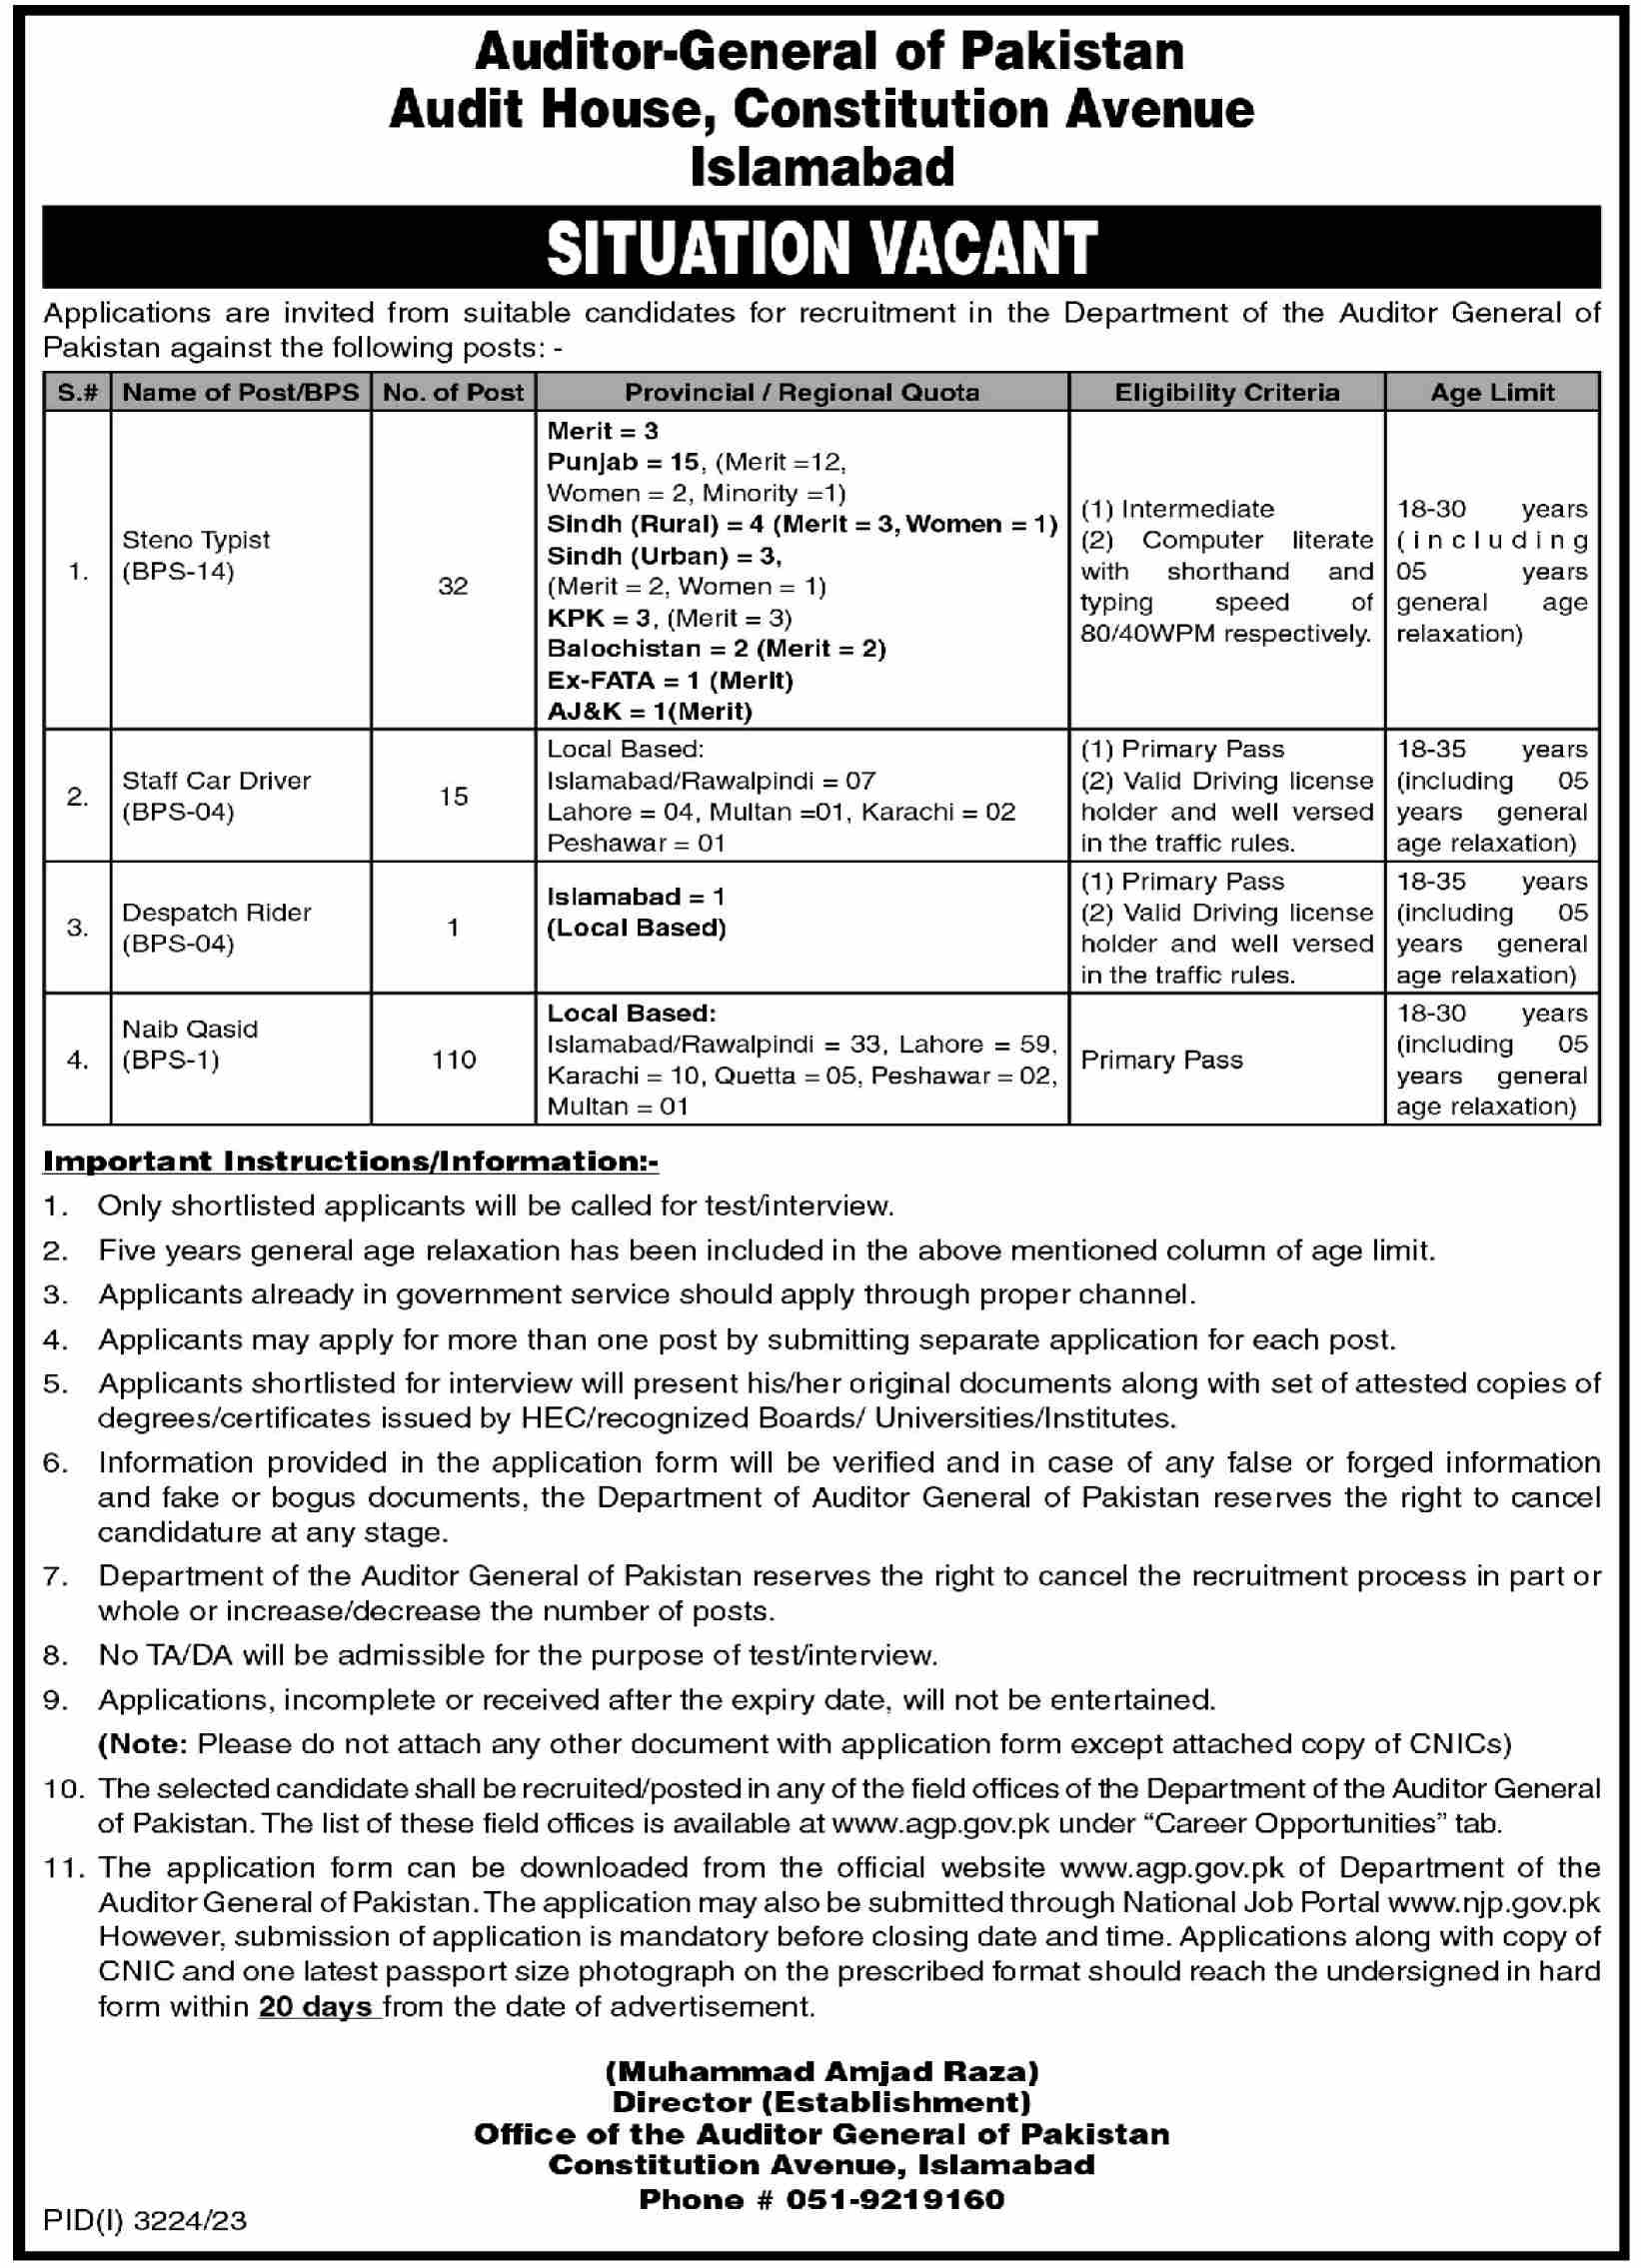 Auditor General of Pakistan Audit House Constitution Avenue Islamabad BPS-14 Jobs